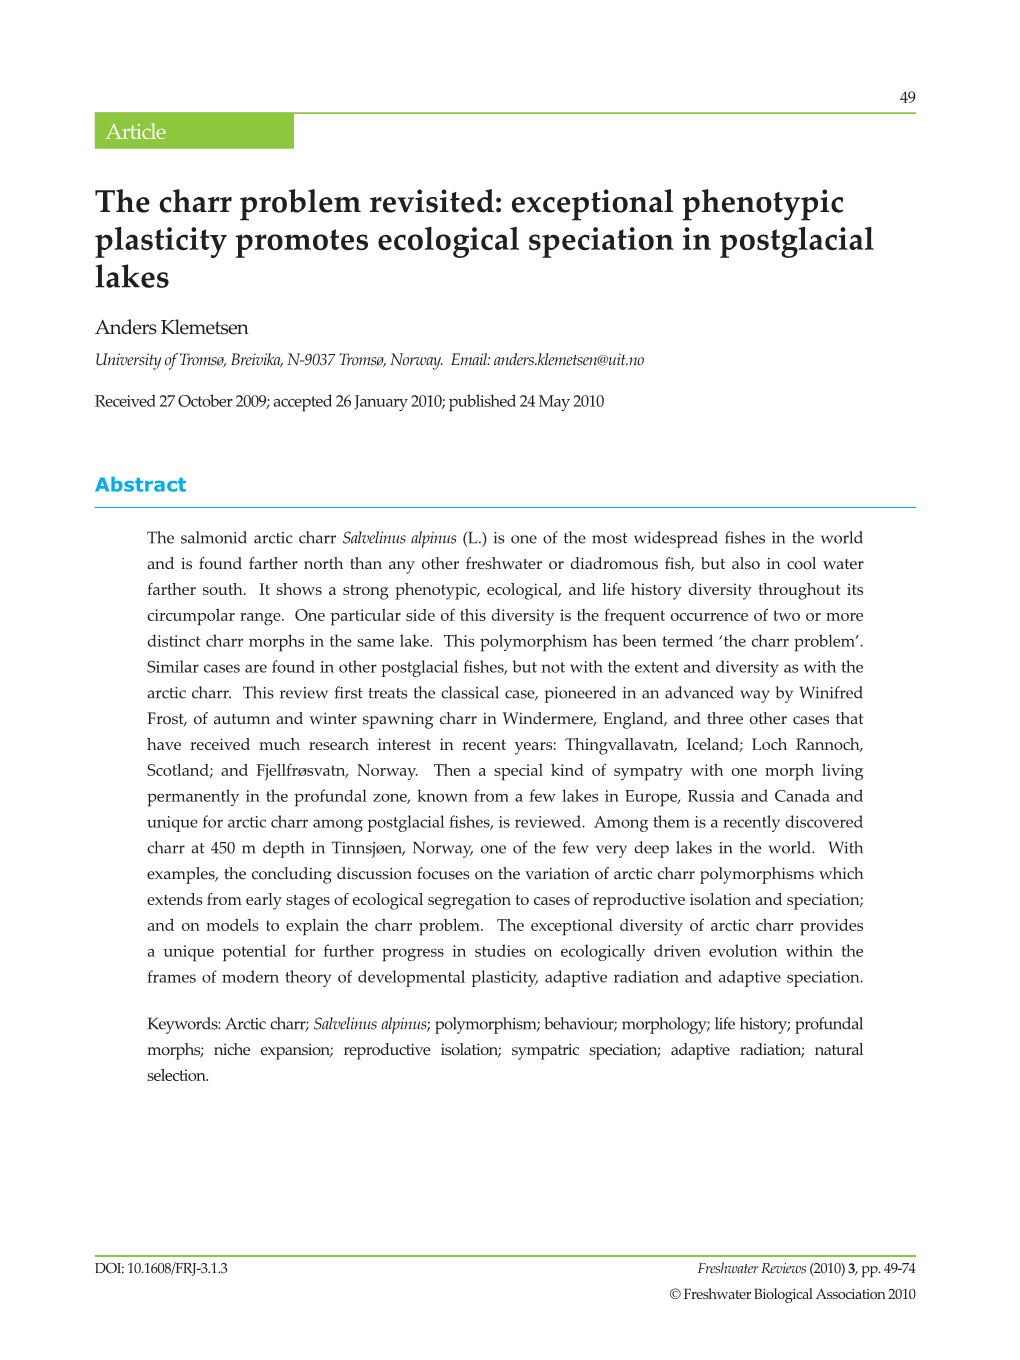 The Charr Problem Revisited: Exceptional Phenotypic Plasticity Promotes Ecological Speciation in Postglacial Lakes